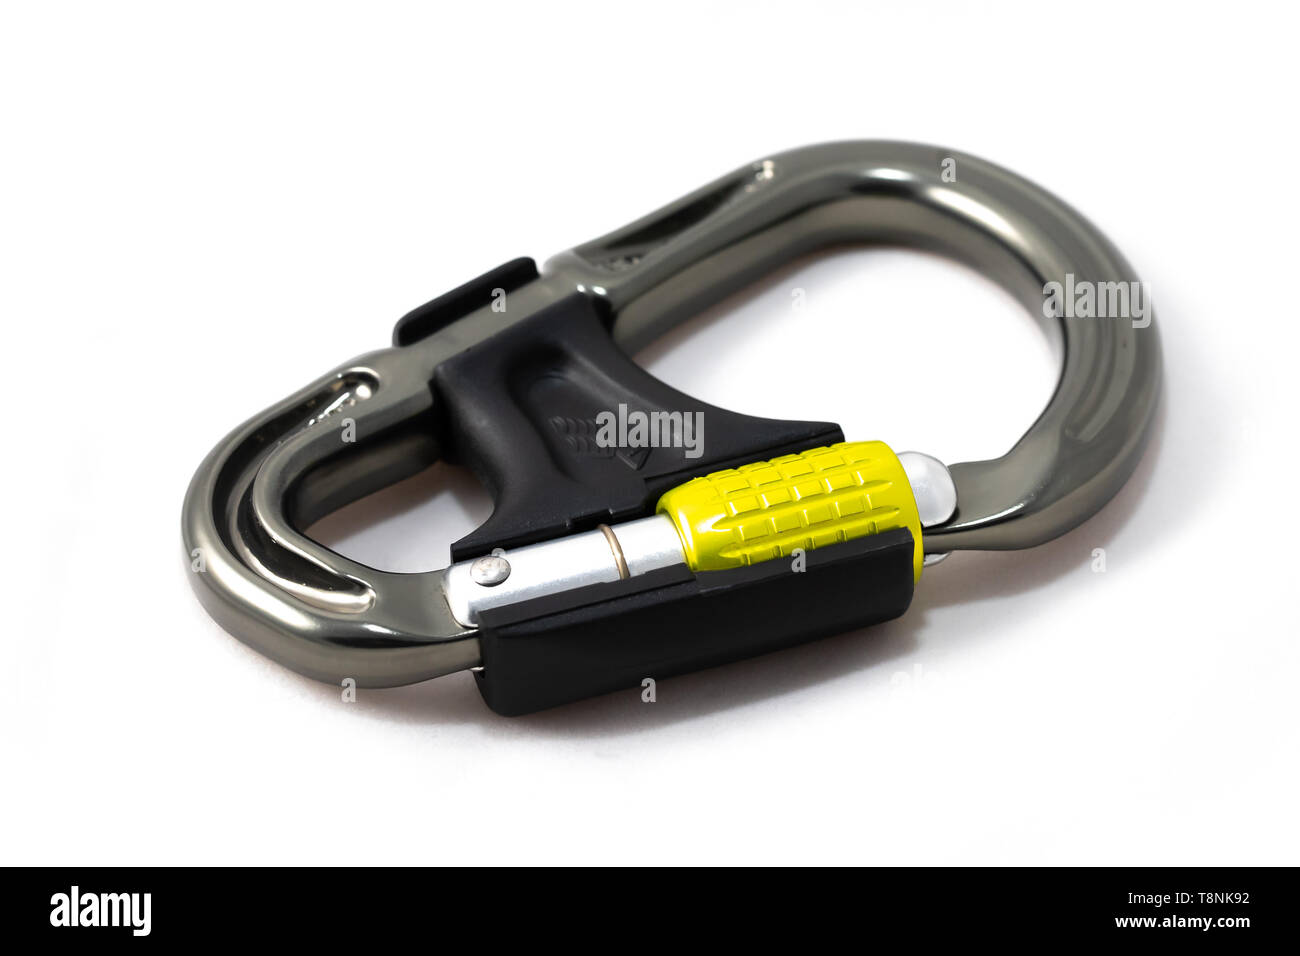 DMM Belay Master carabiner on a clean white background Stock Photo - Alamy